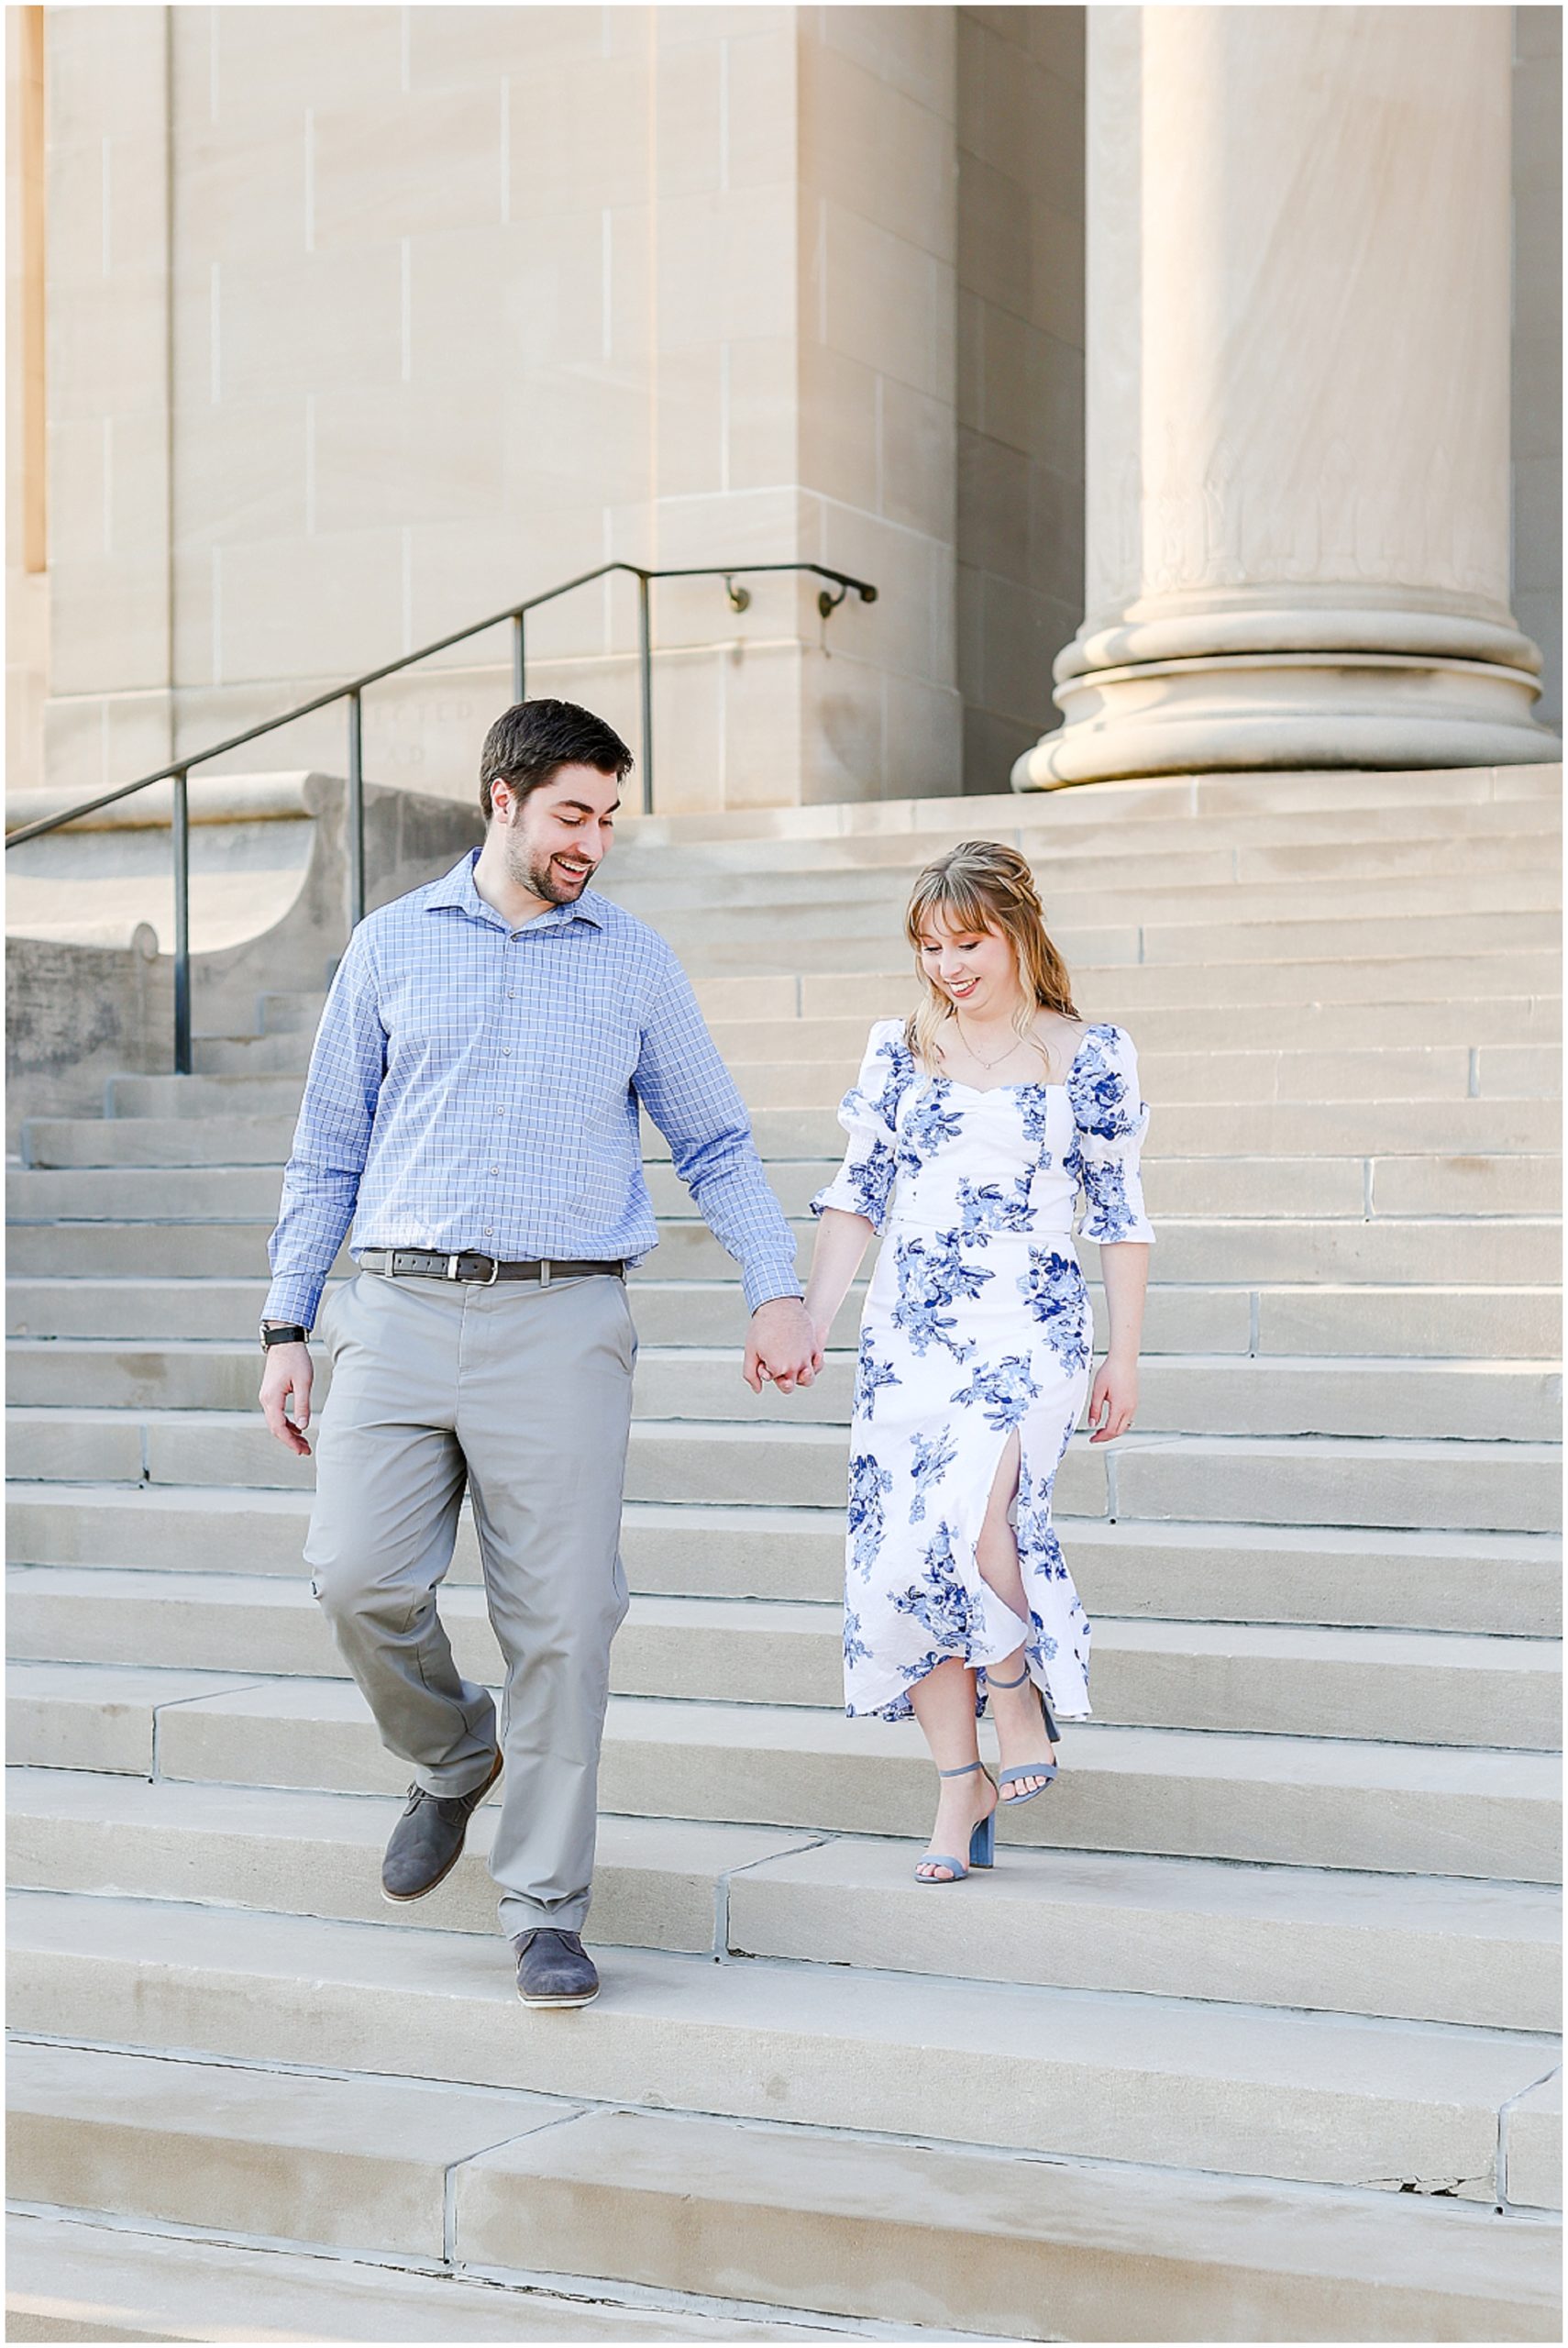 Ali & Connor's Kansas City Nelson Atkins Museum Engagement Photos by Mariam Saifan Photography - Wedding at the Hawthorne House